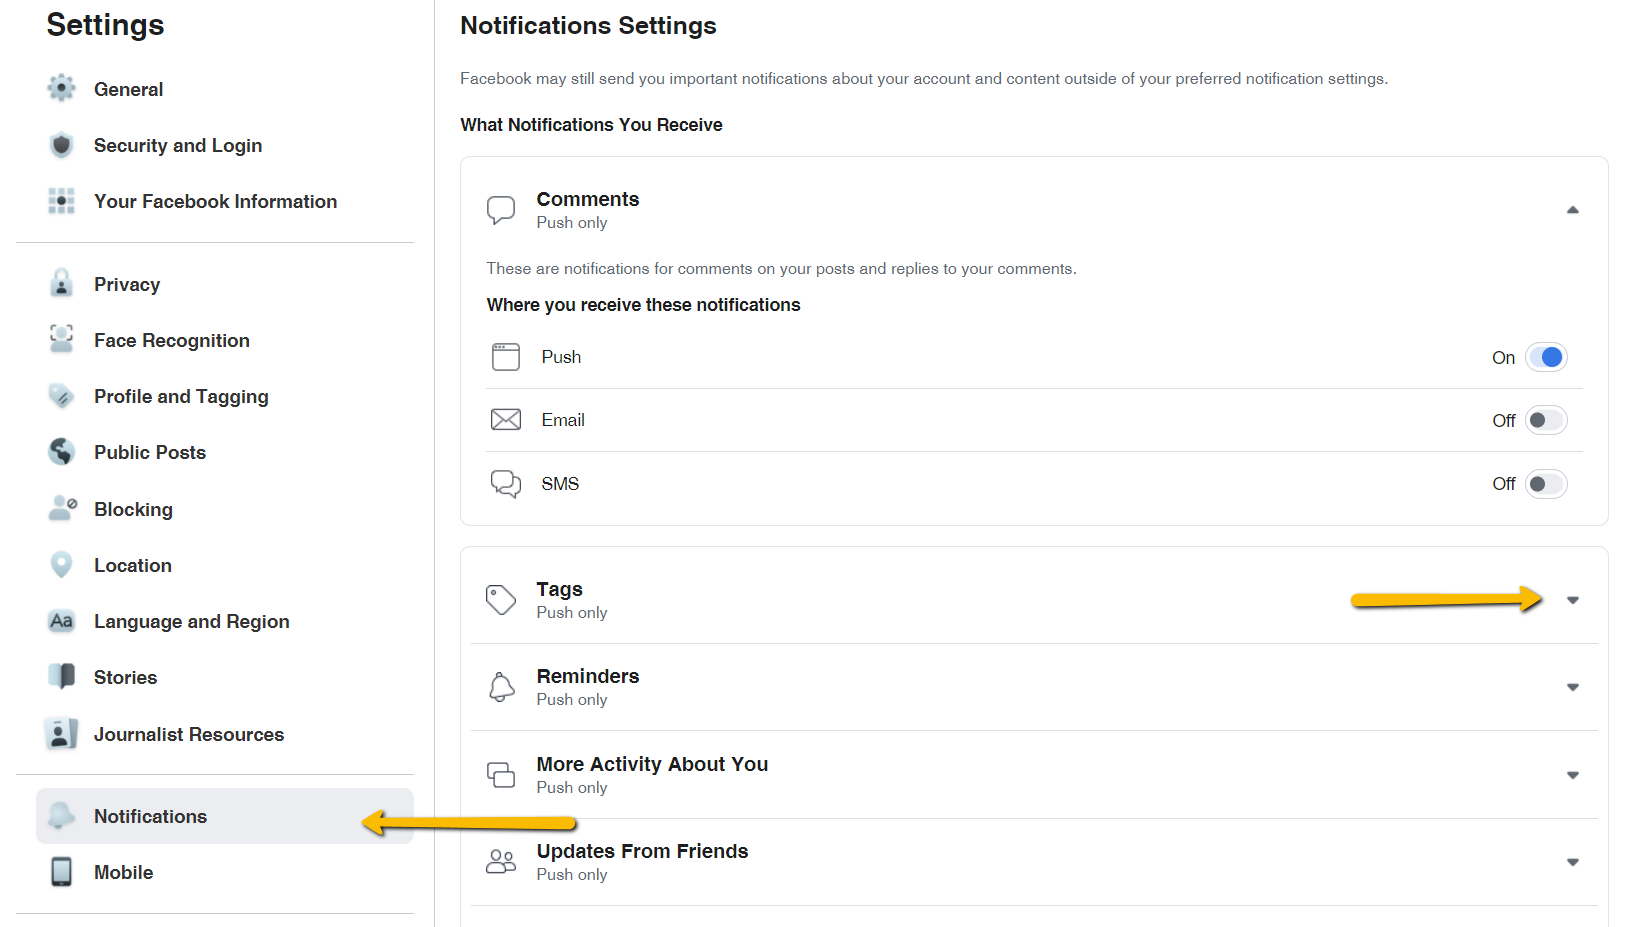 All notification settings are easily accessible in one place.